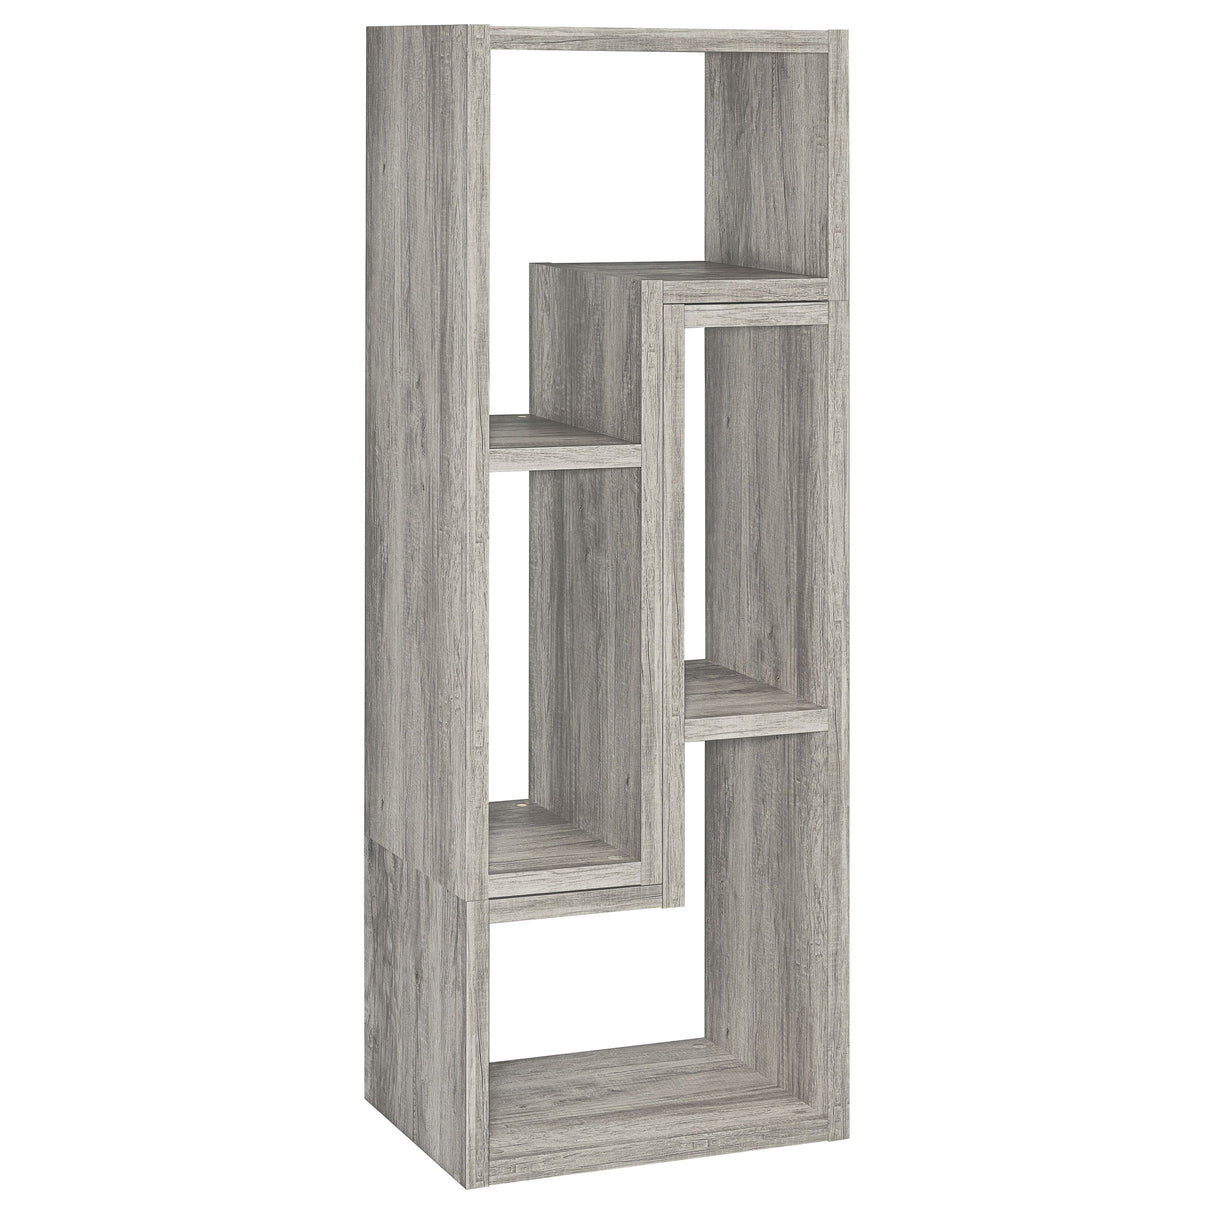 Bookcase / Tv Stand - Velma Convertable Bookcase and TV Console Grey Driftwood